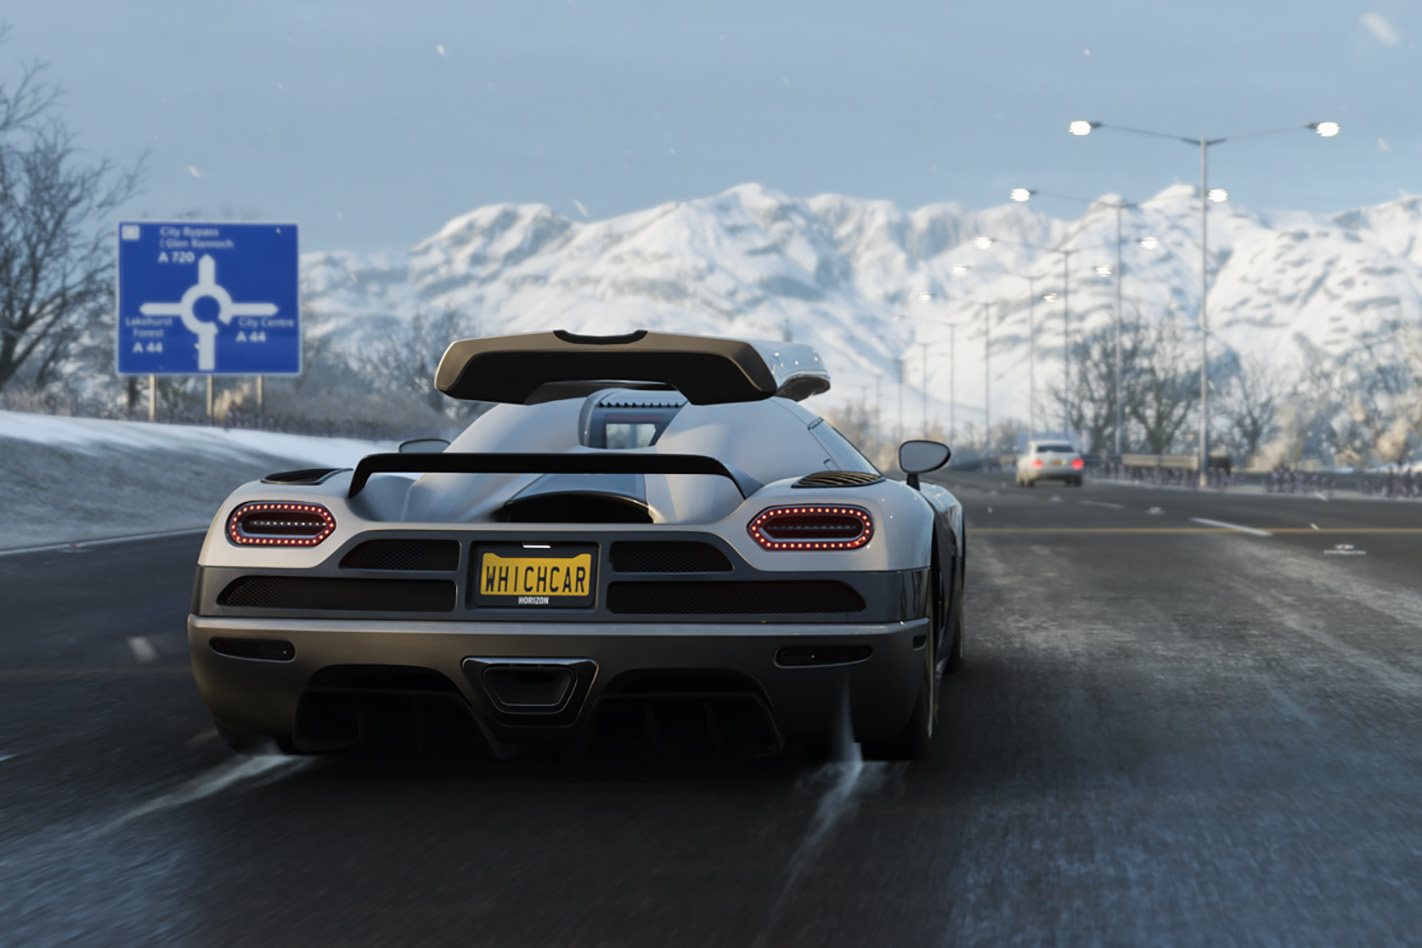 The Best Driving Games For Xbox One